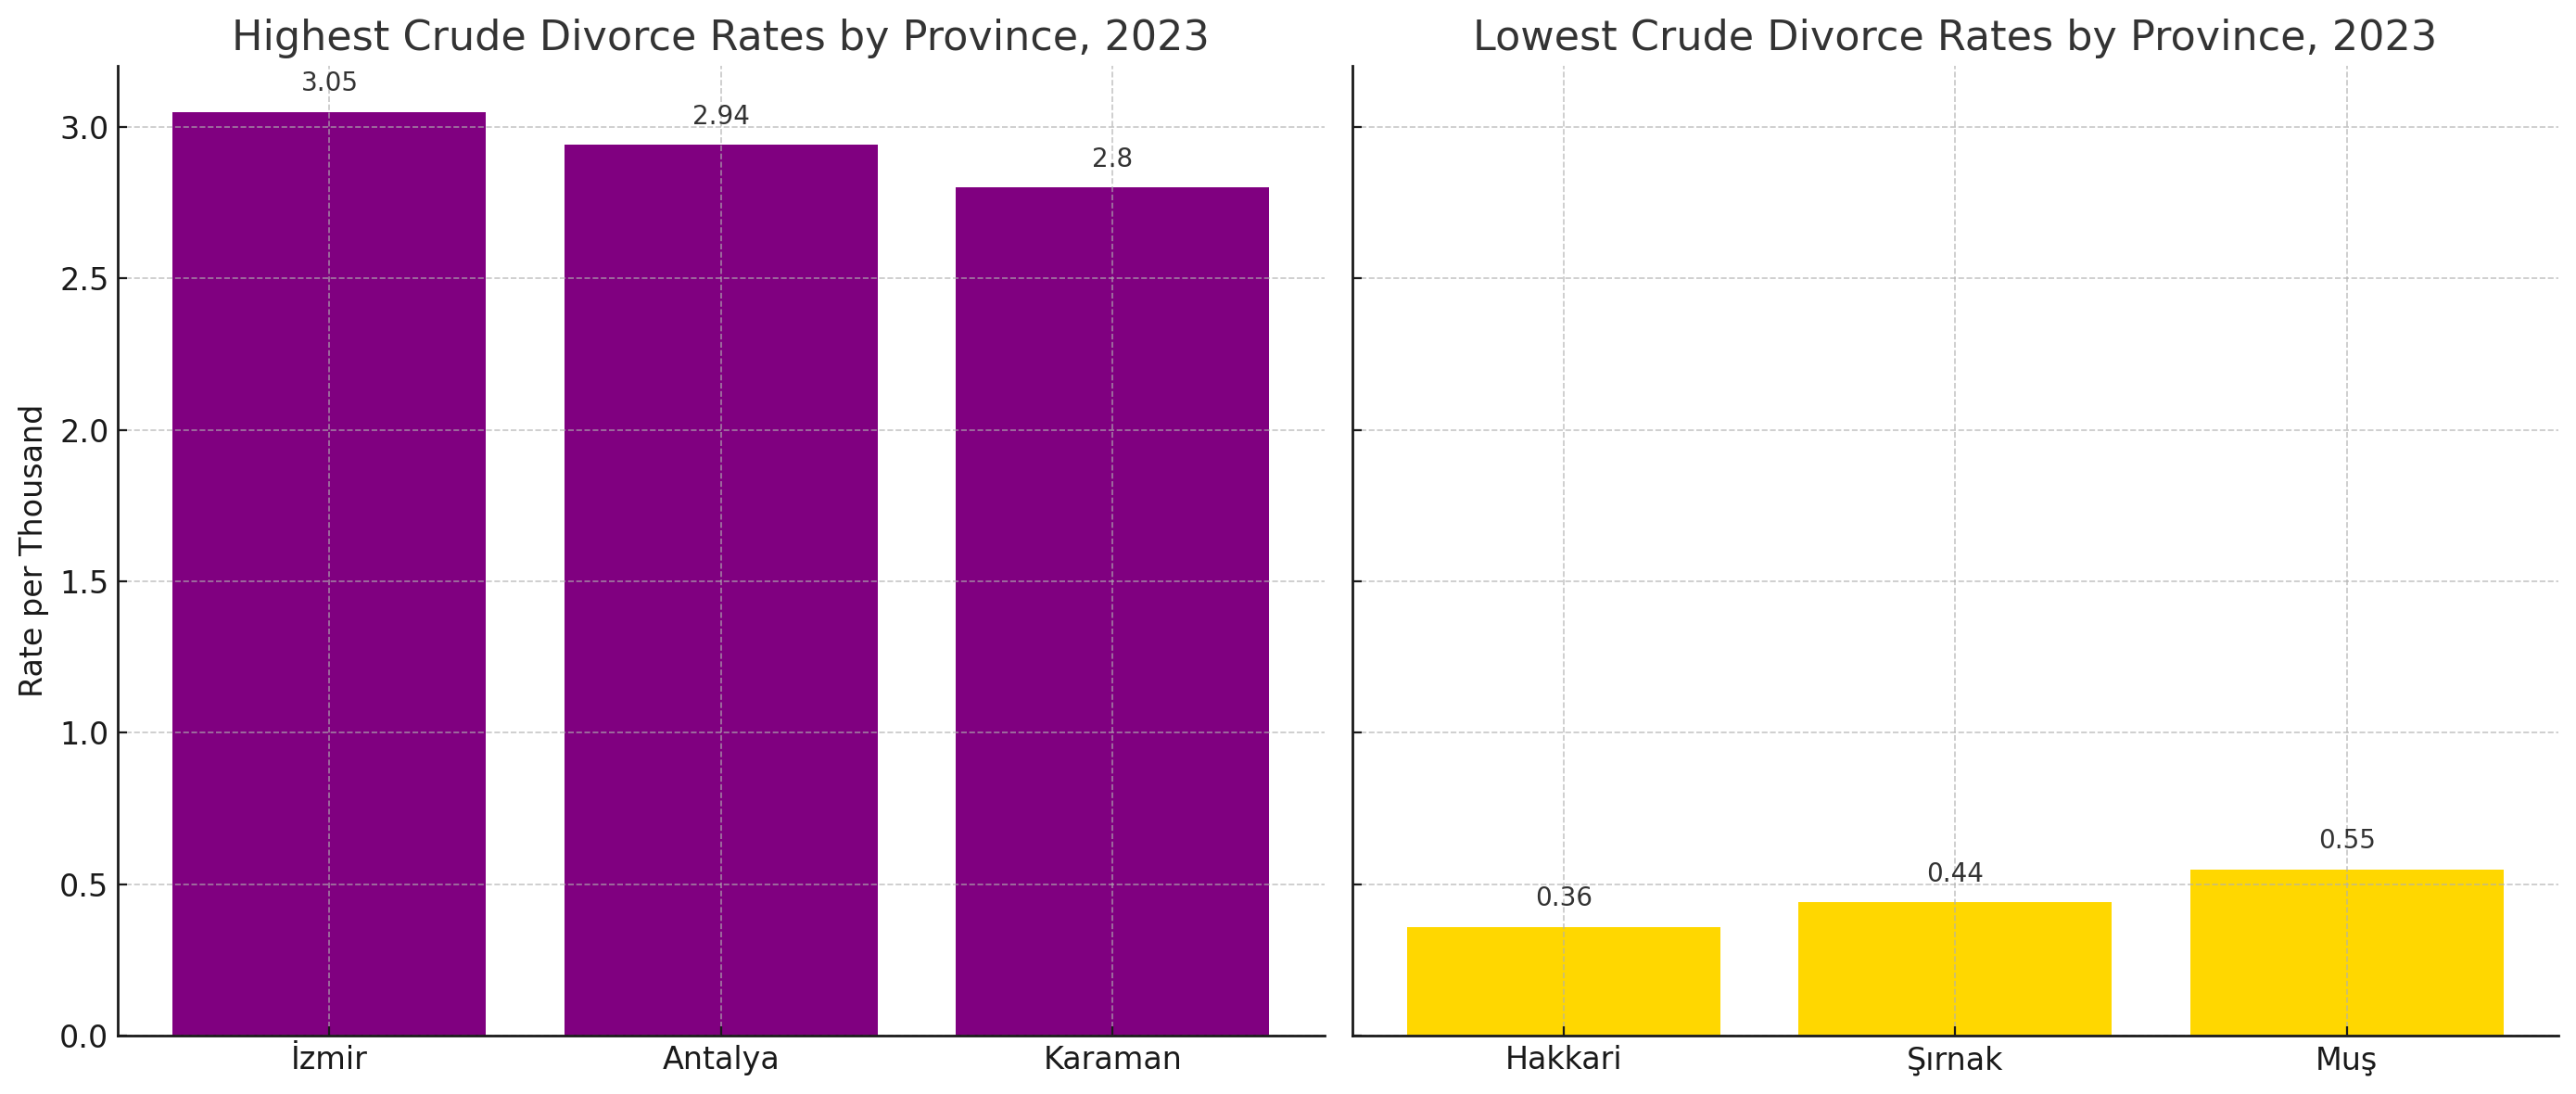 Chart shows Highest and Lowest Crude Divorce Rates by Province